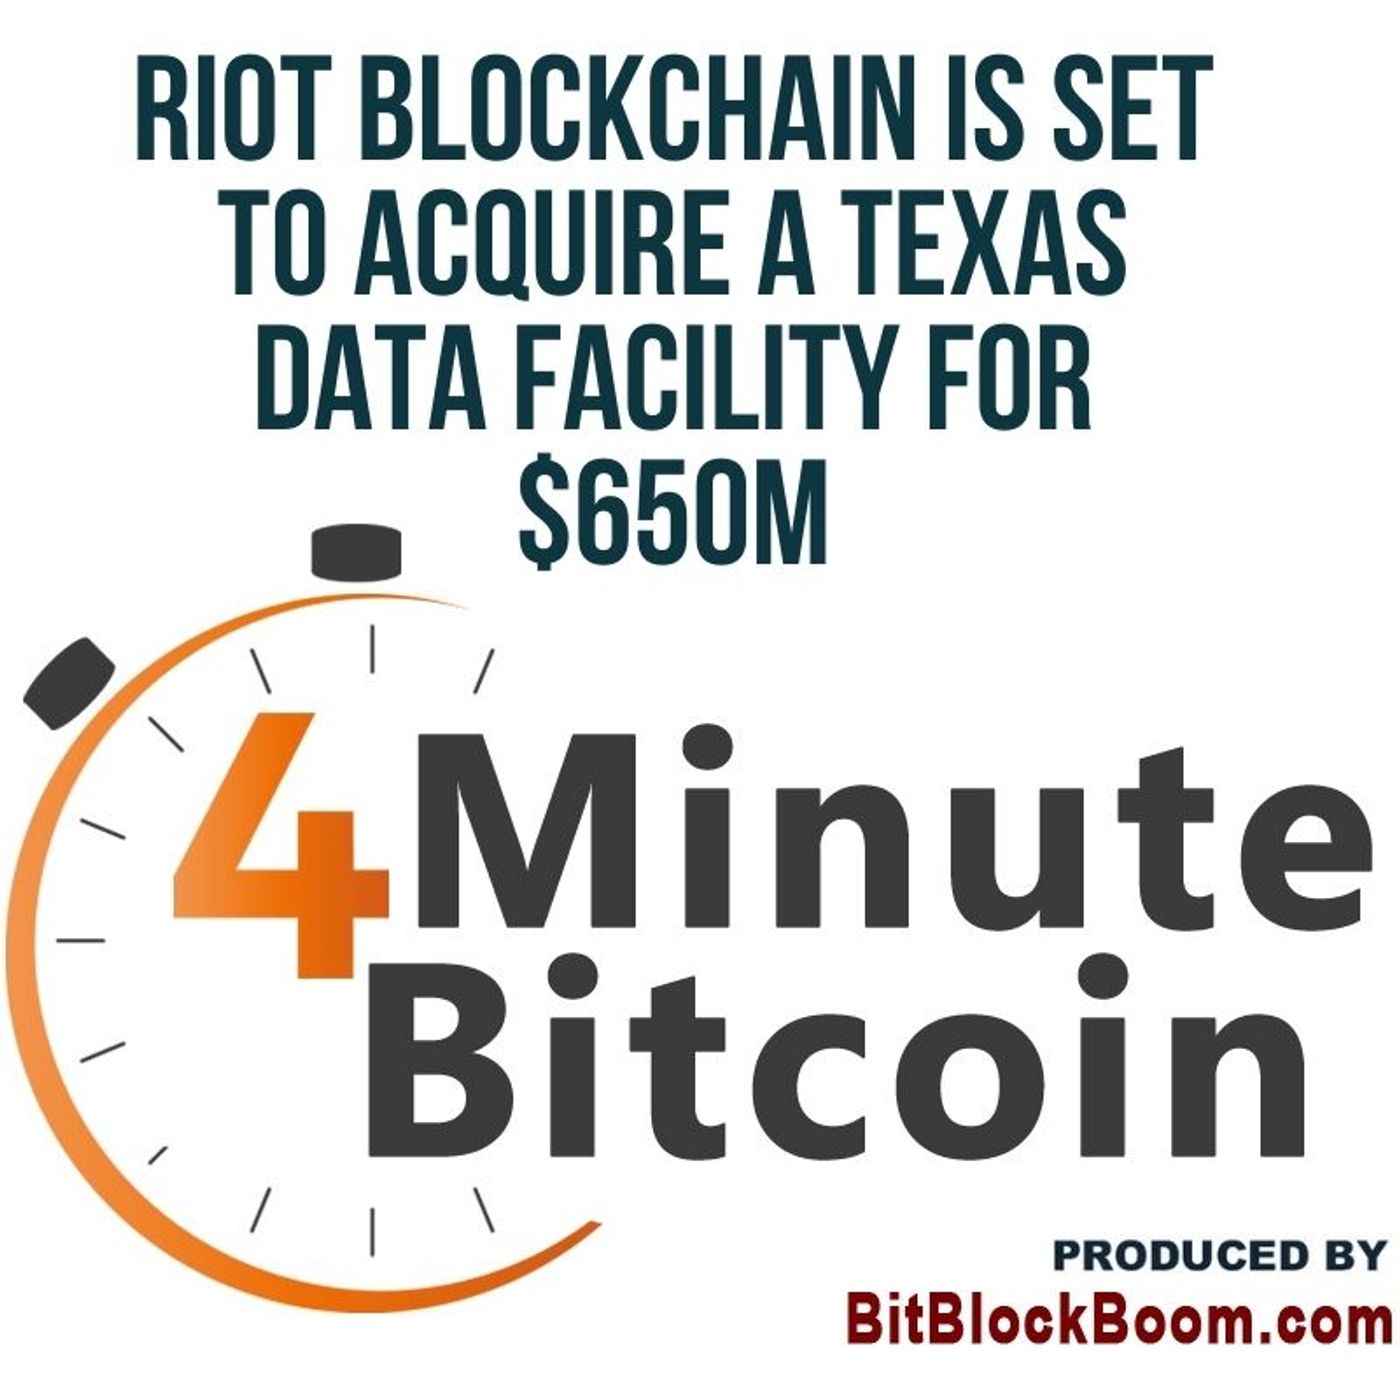 Riot Blockchain Is Set To Acquire A Texas Data Facility For $650M